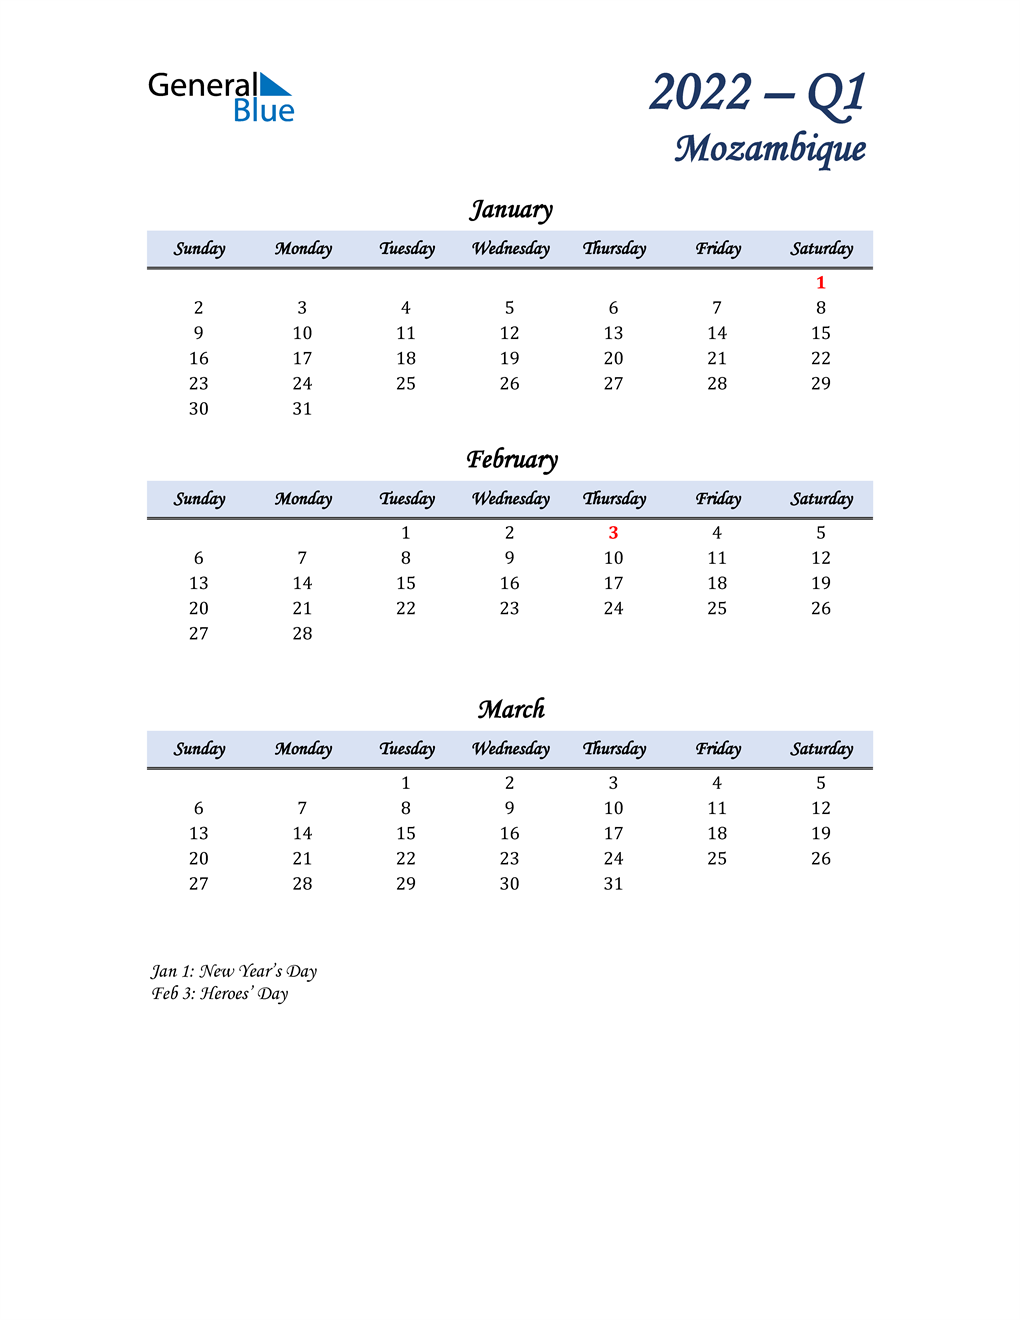  January, February, and March Calendar for Mozambique